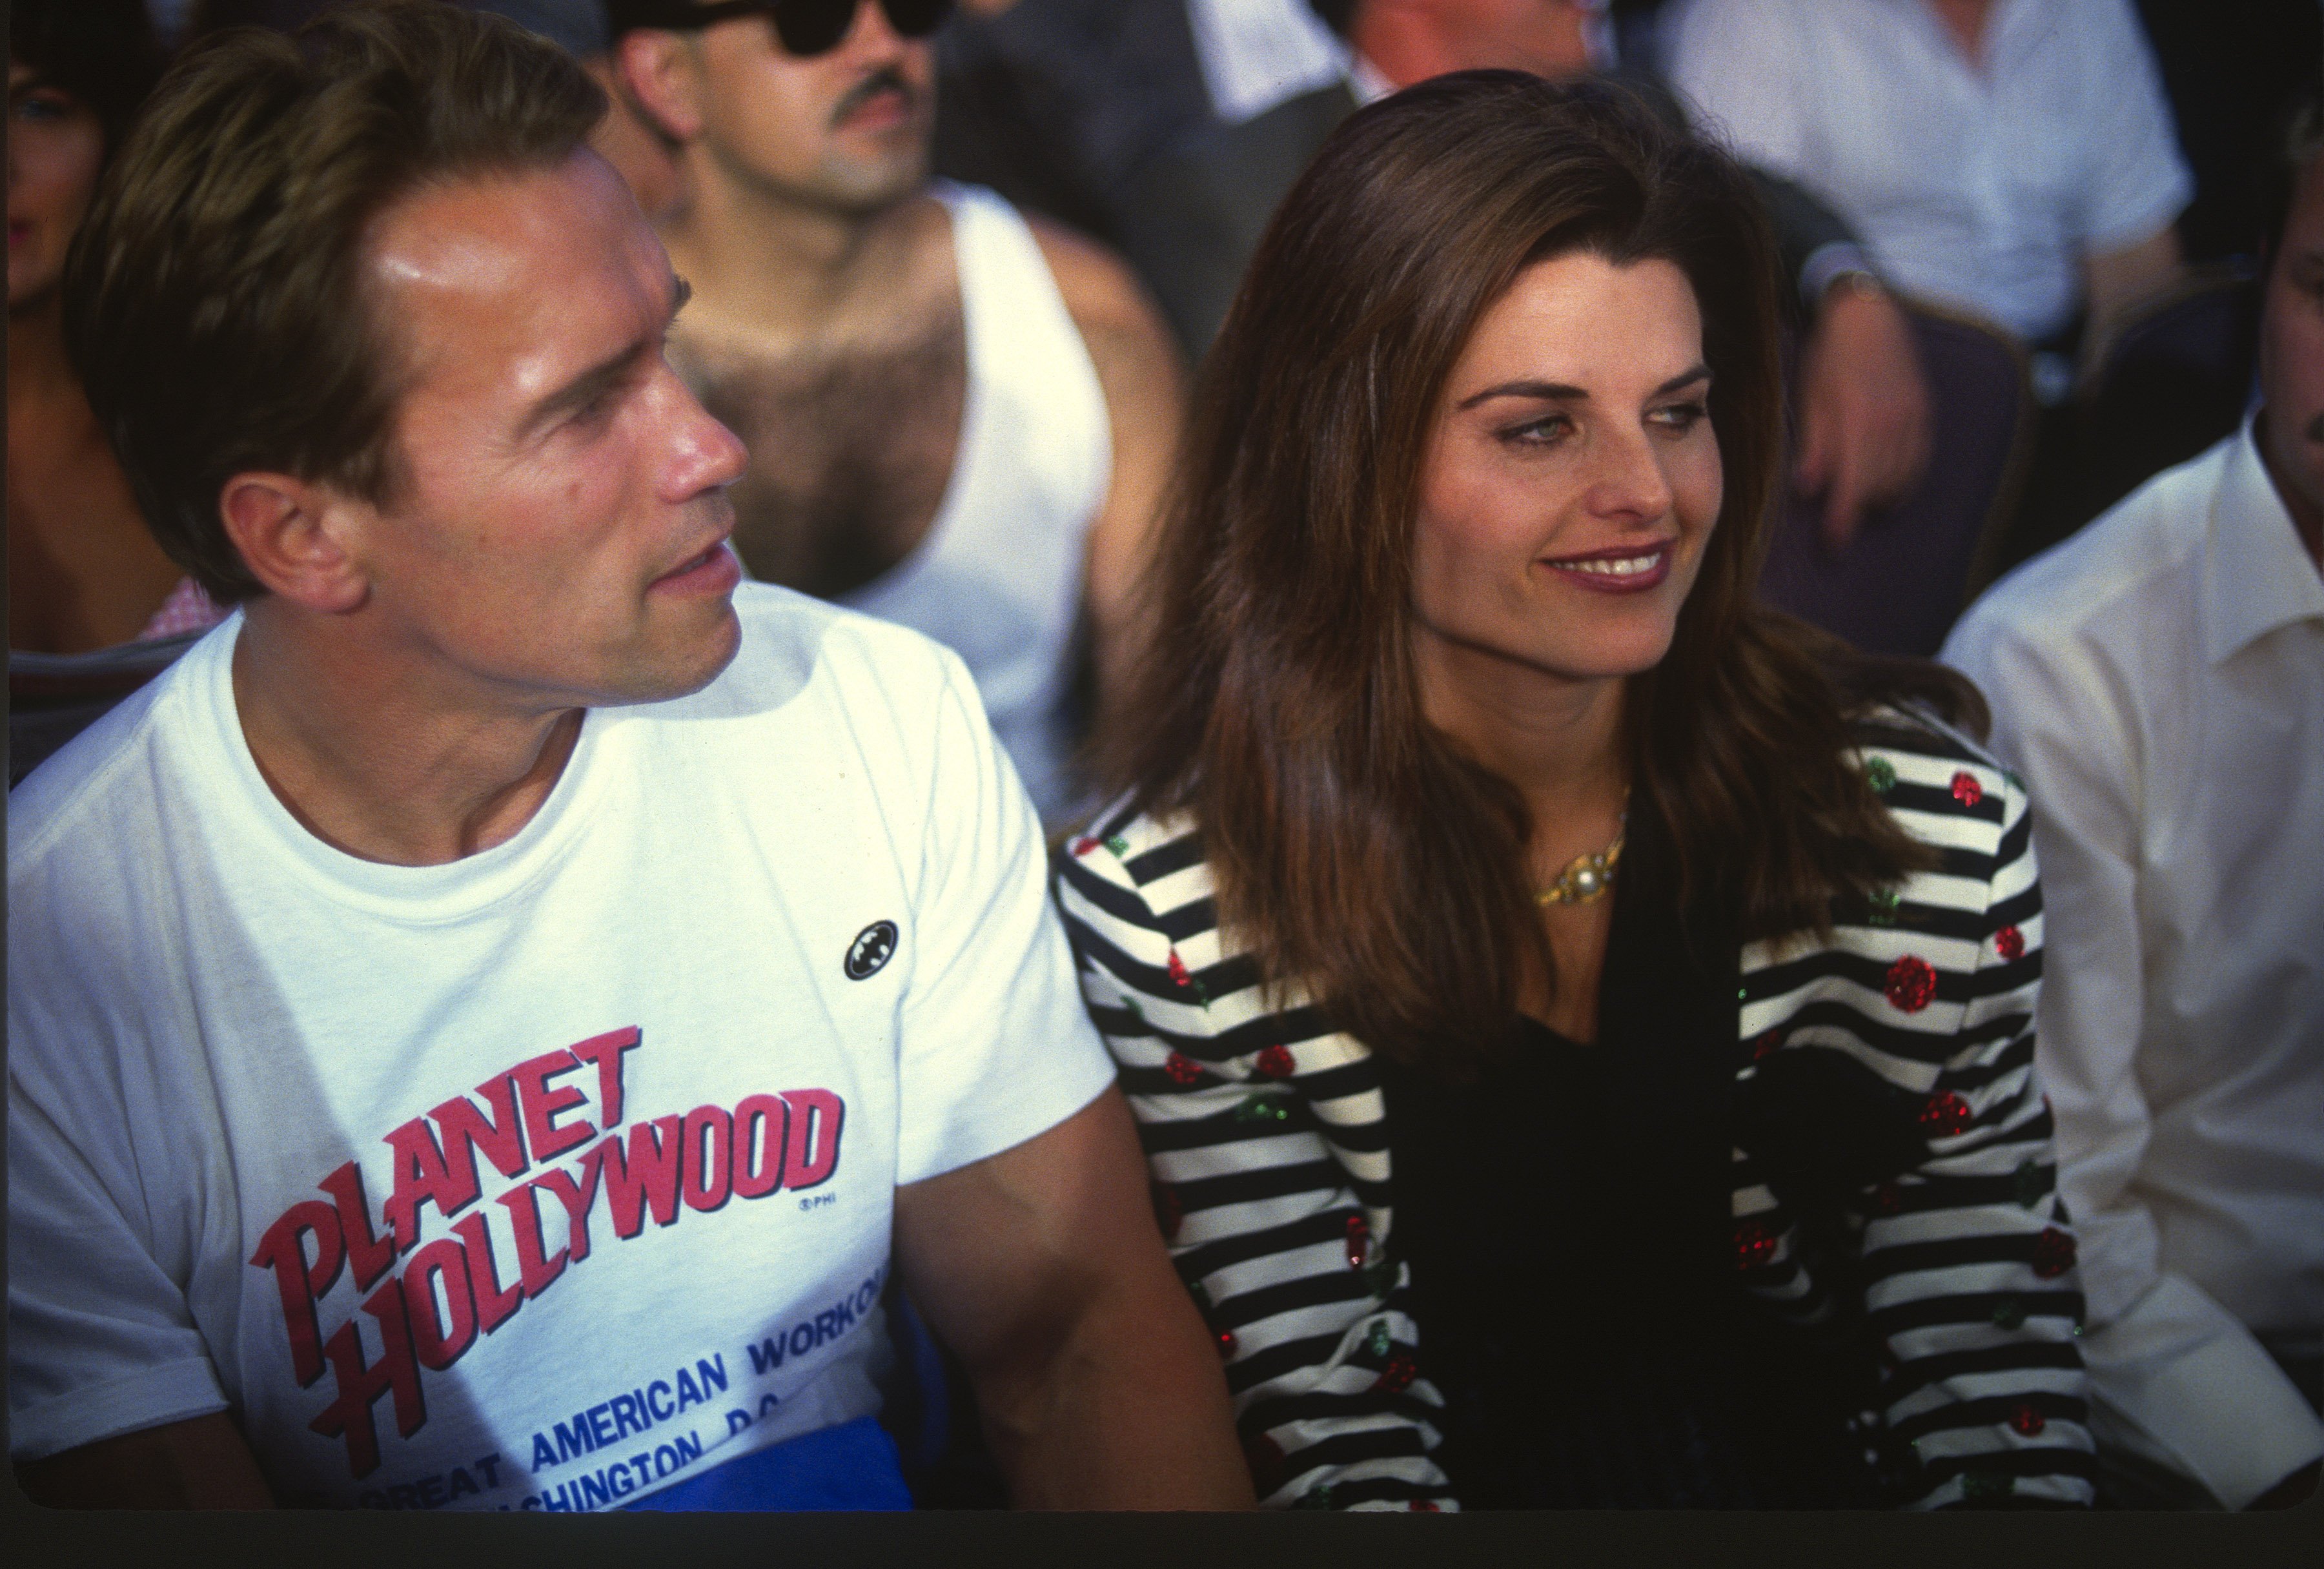 Arnold Schwarzenegger and his wife Maria Shriver look on during the WBC, WBA, and IBF heavyweight title fight between Larry Holmes and Evander Holyfield on June 19, 1992, at Caesars Palace in Las Vegas, Nevada. | Source: Getty Images